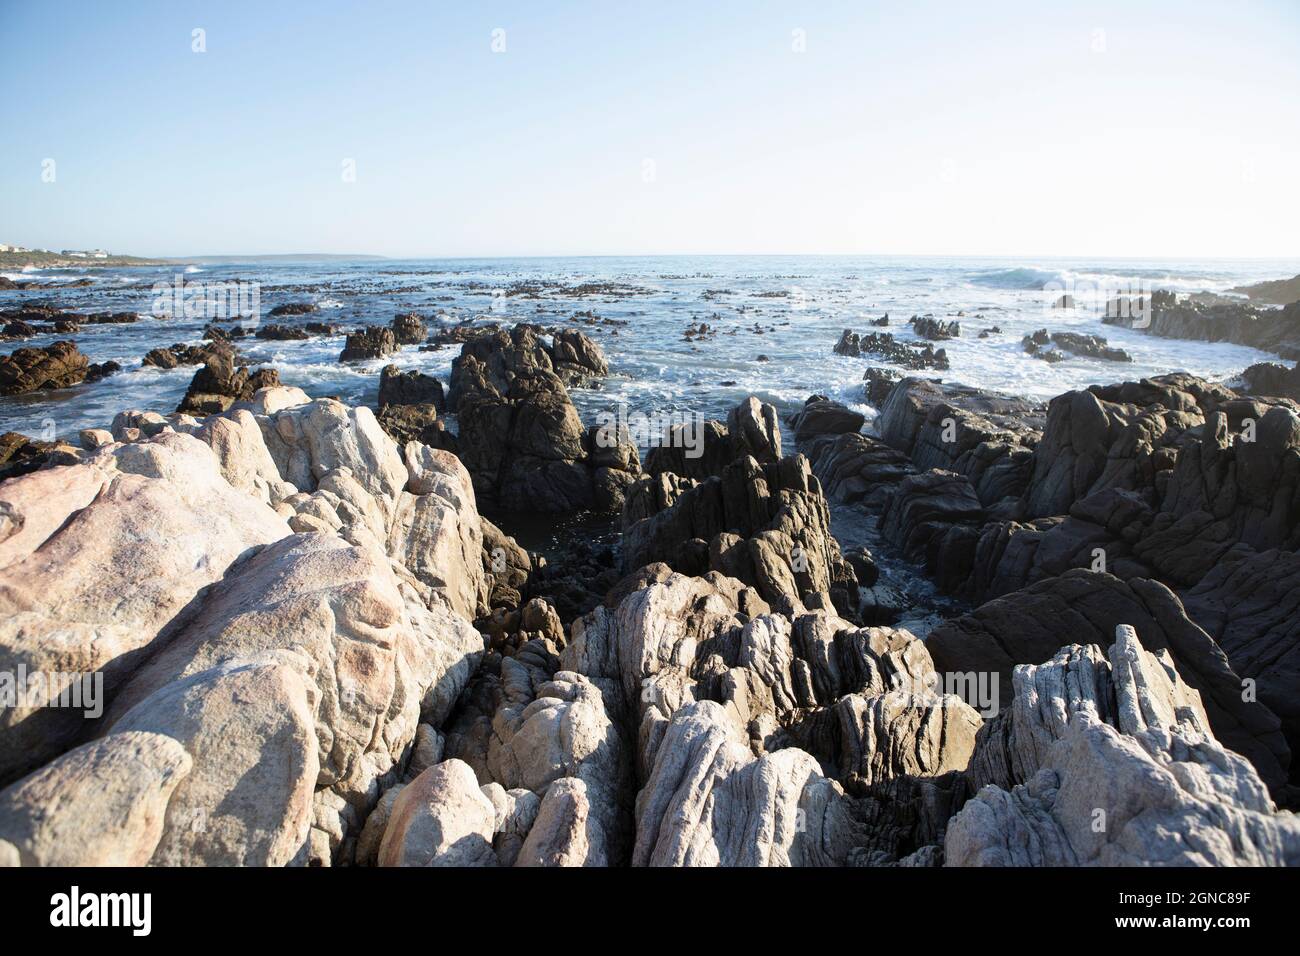 Jagged rocks ridges leading out into the sea, and waves breaking on shore at De Kelders Stock Photo